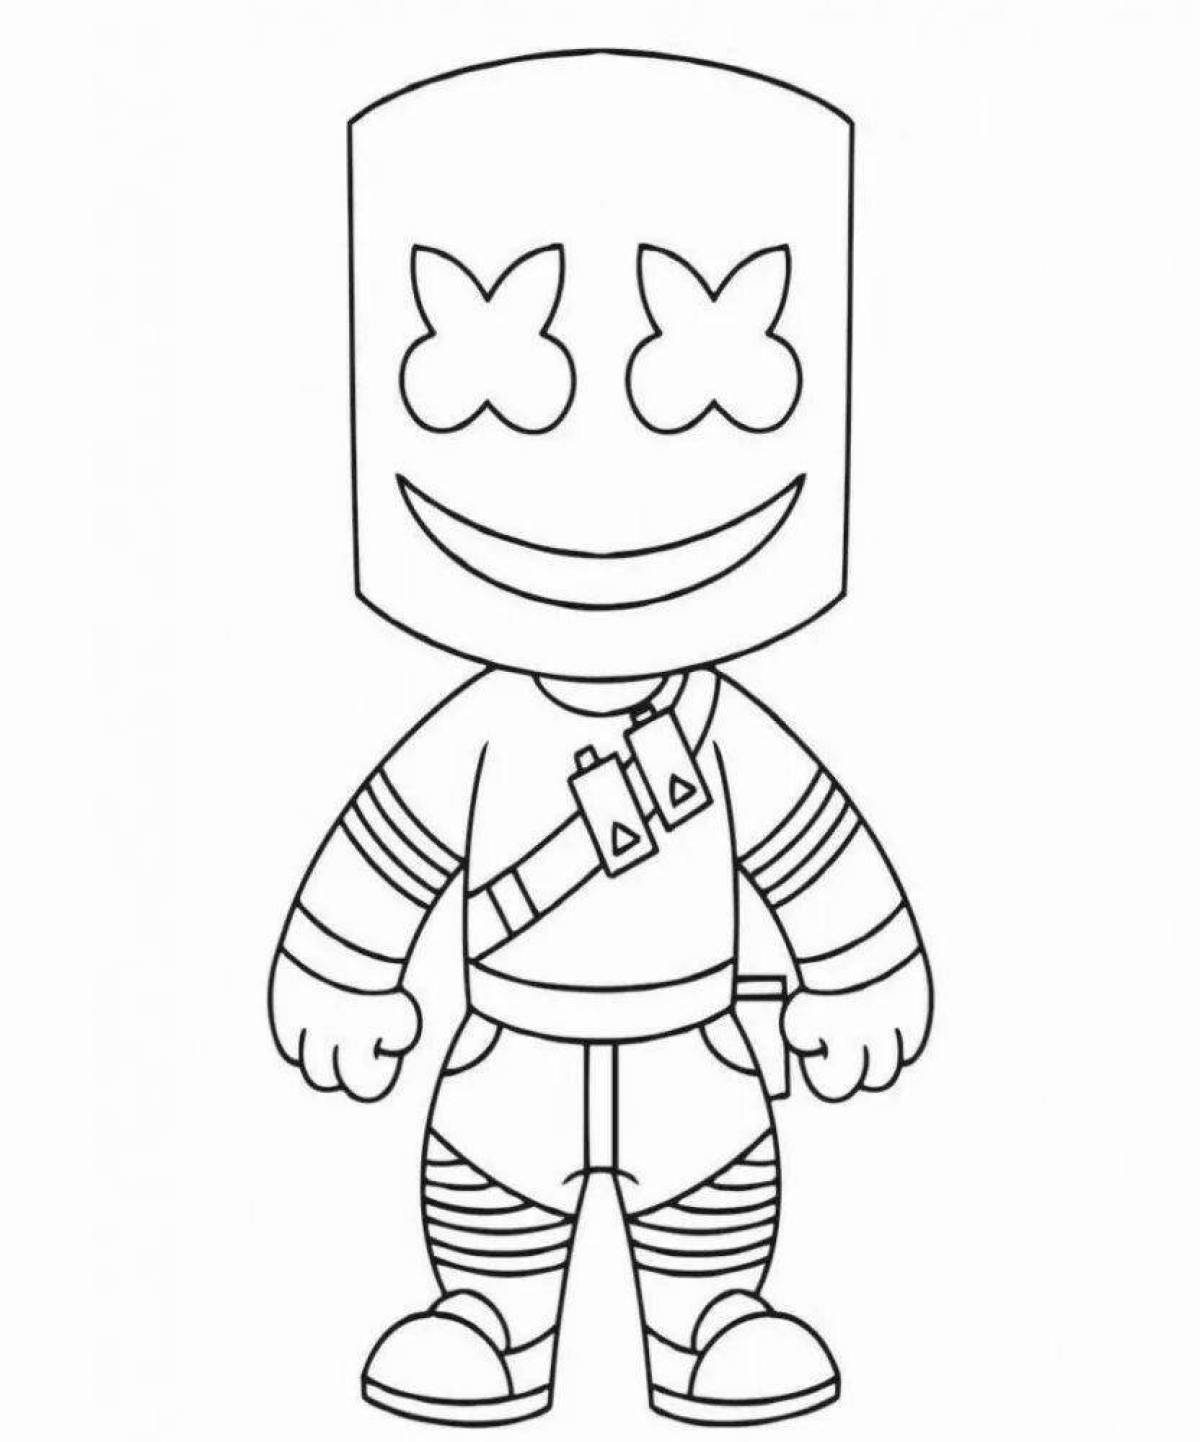 Rampant marshmallow coloring page